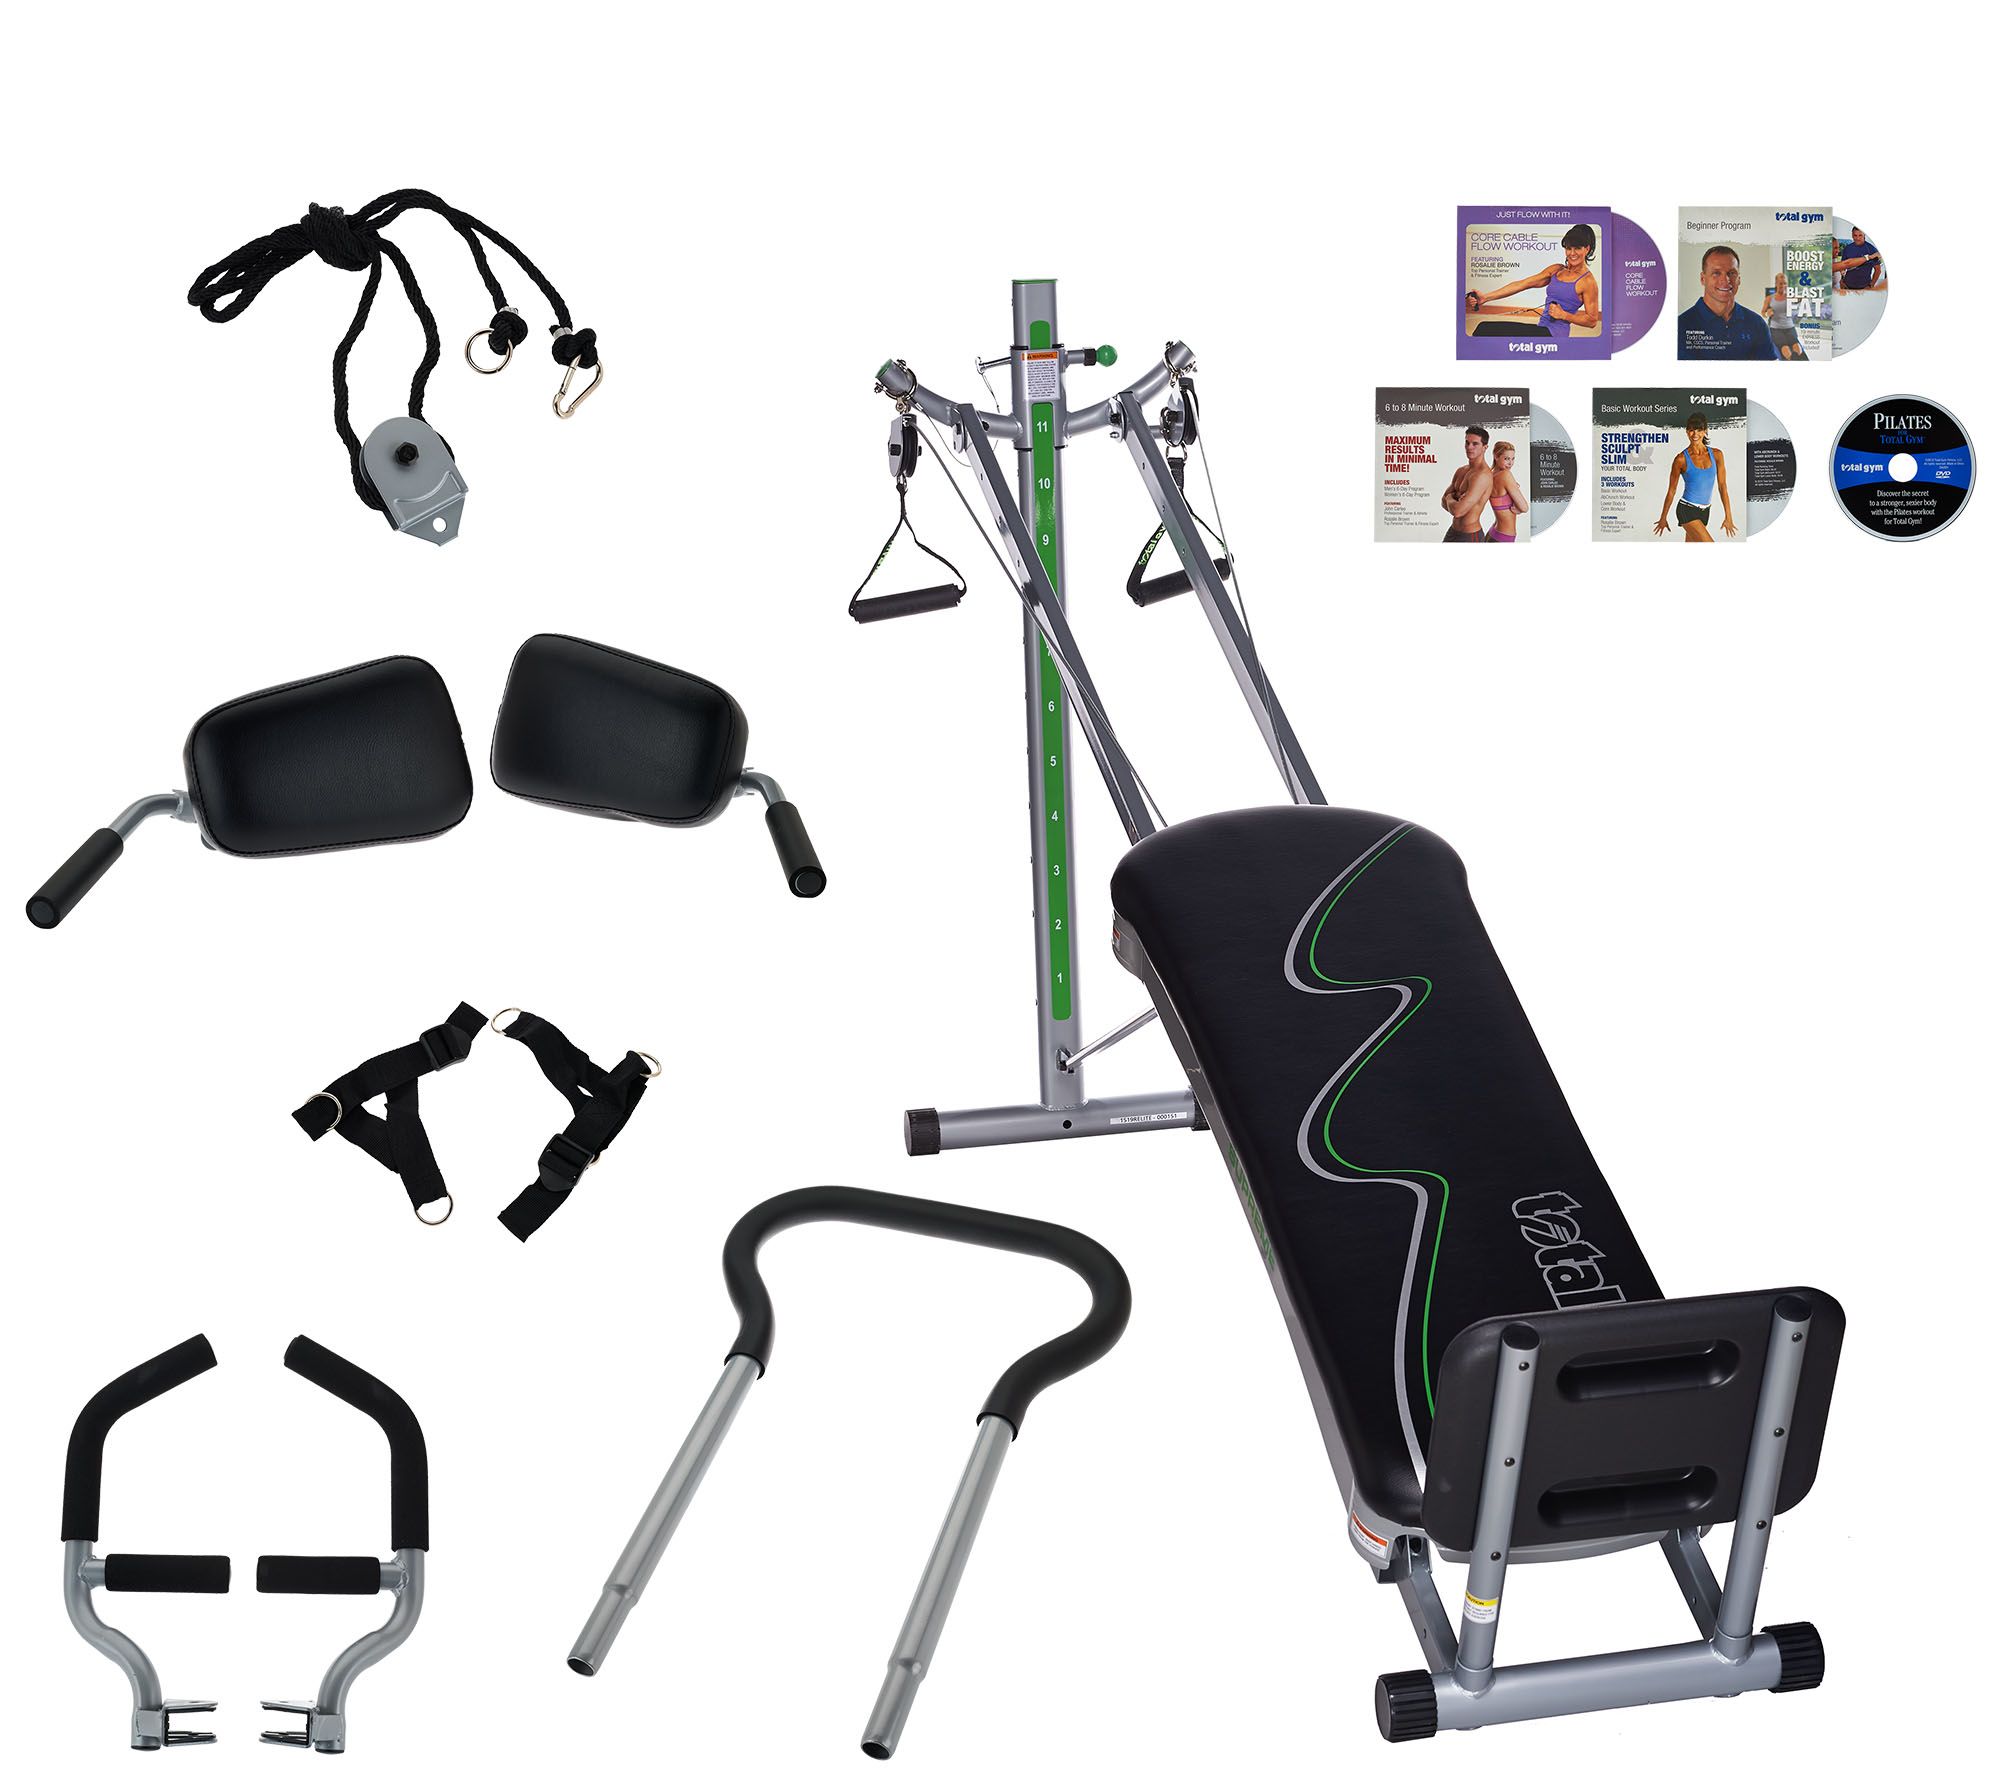 Side Shaper Pro Total Body Workout and Sculpting Machine 